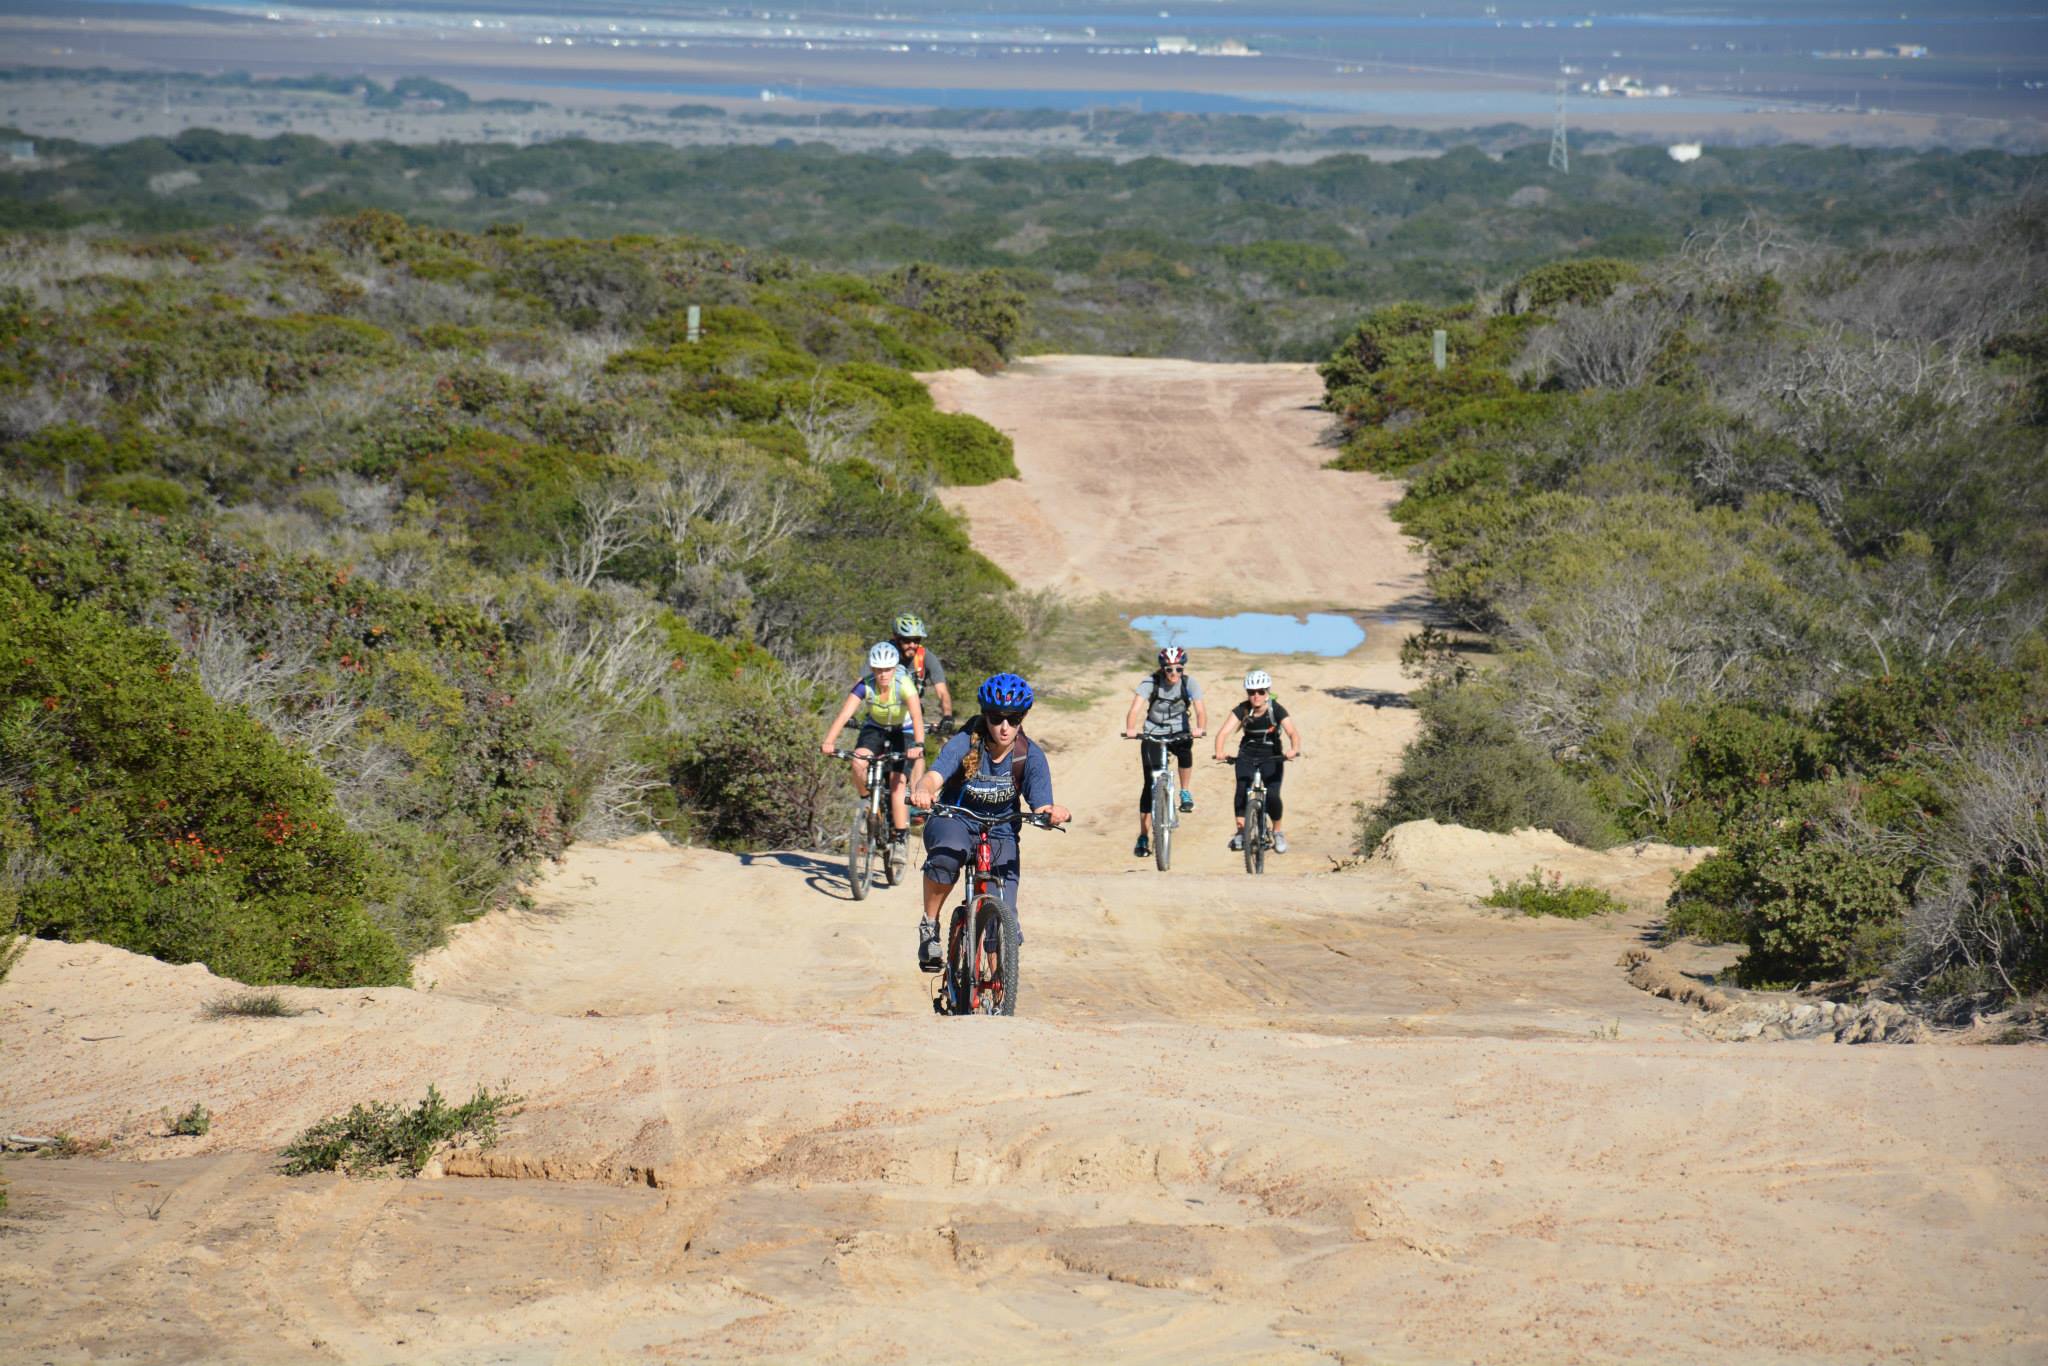 5 people riding bikes up a dirt hill